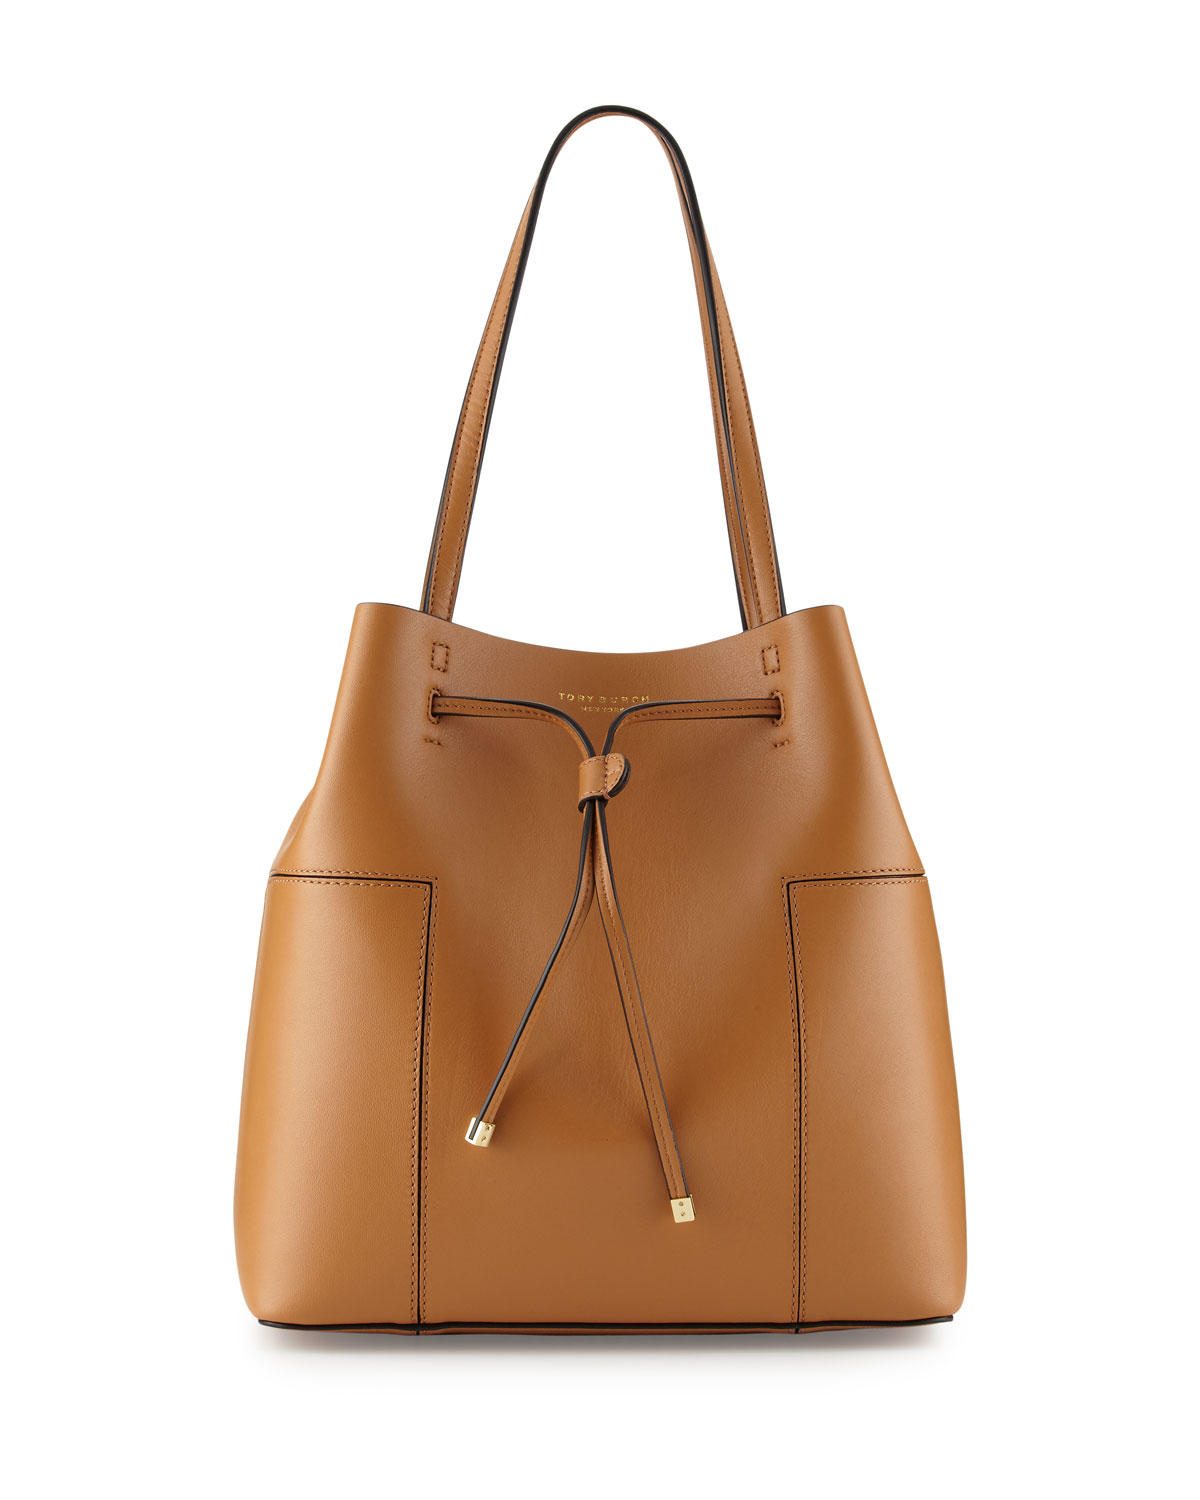 Tory Burch Block-t Leather Bucket Tote Bag in Brown - Lyst